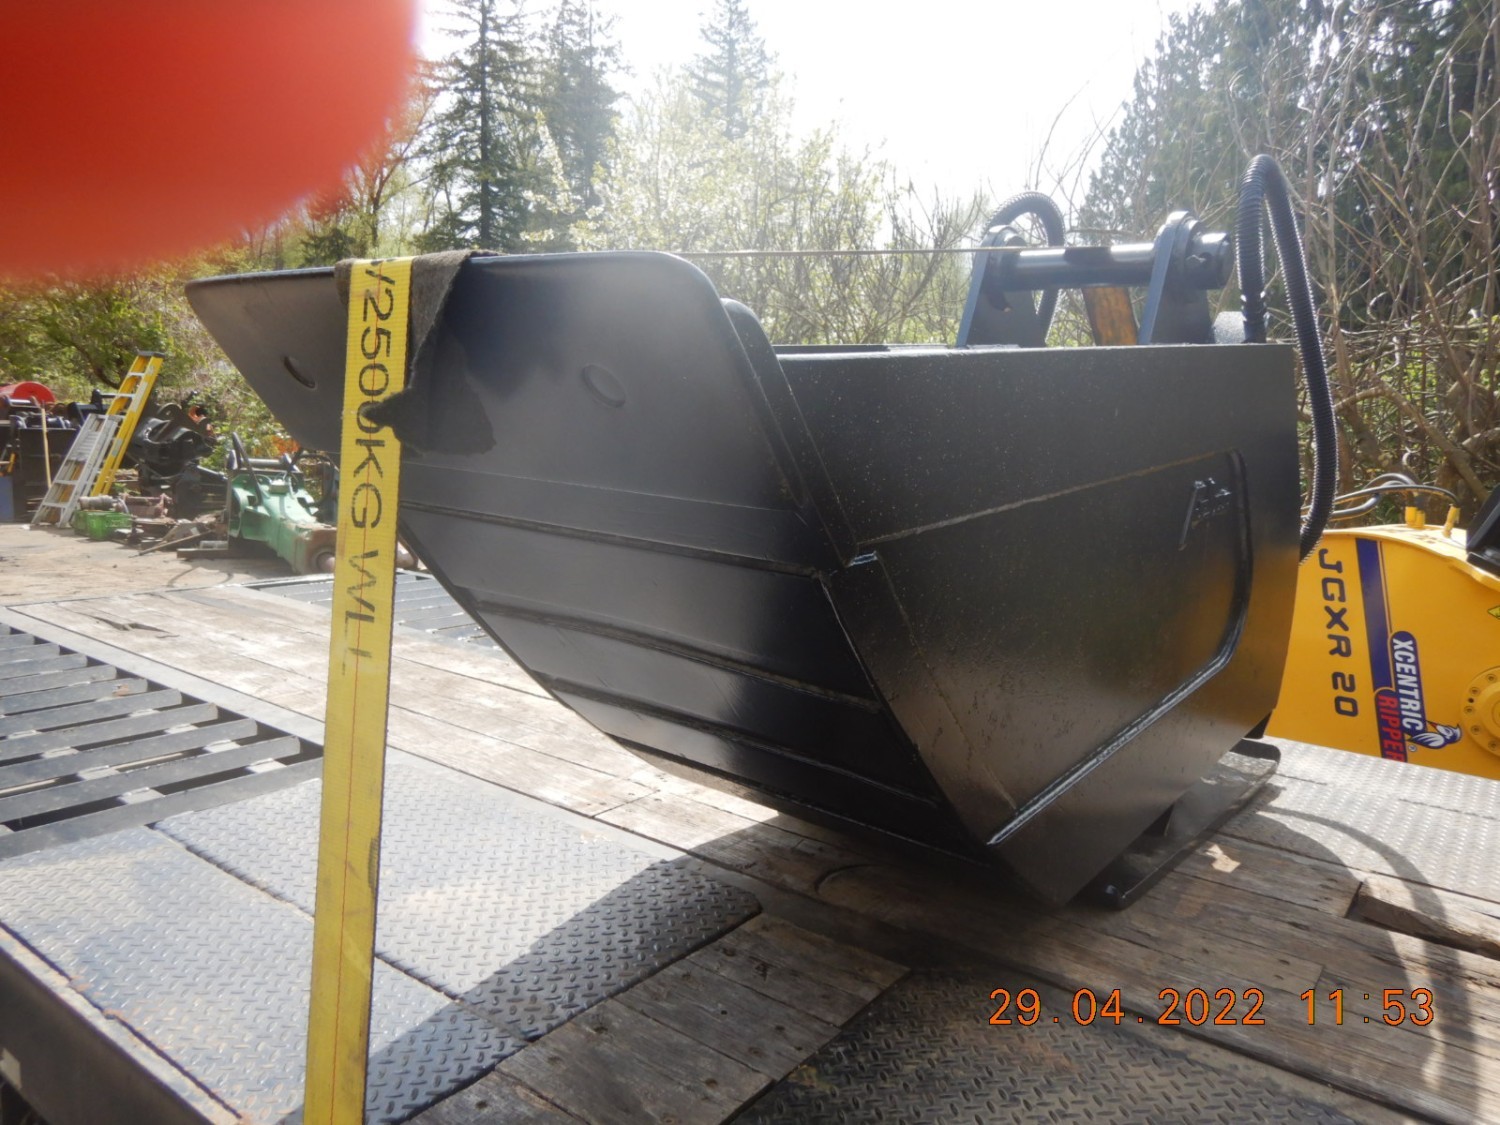 felco-200-350-class-excavator-vibratory-hydraulic-plate-compaction-buckets-as-new-ready-to-work-big-3